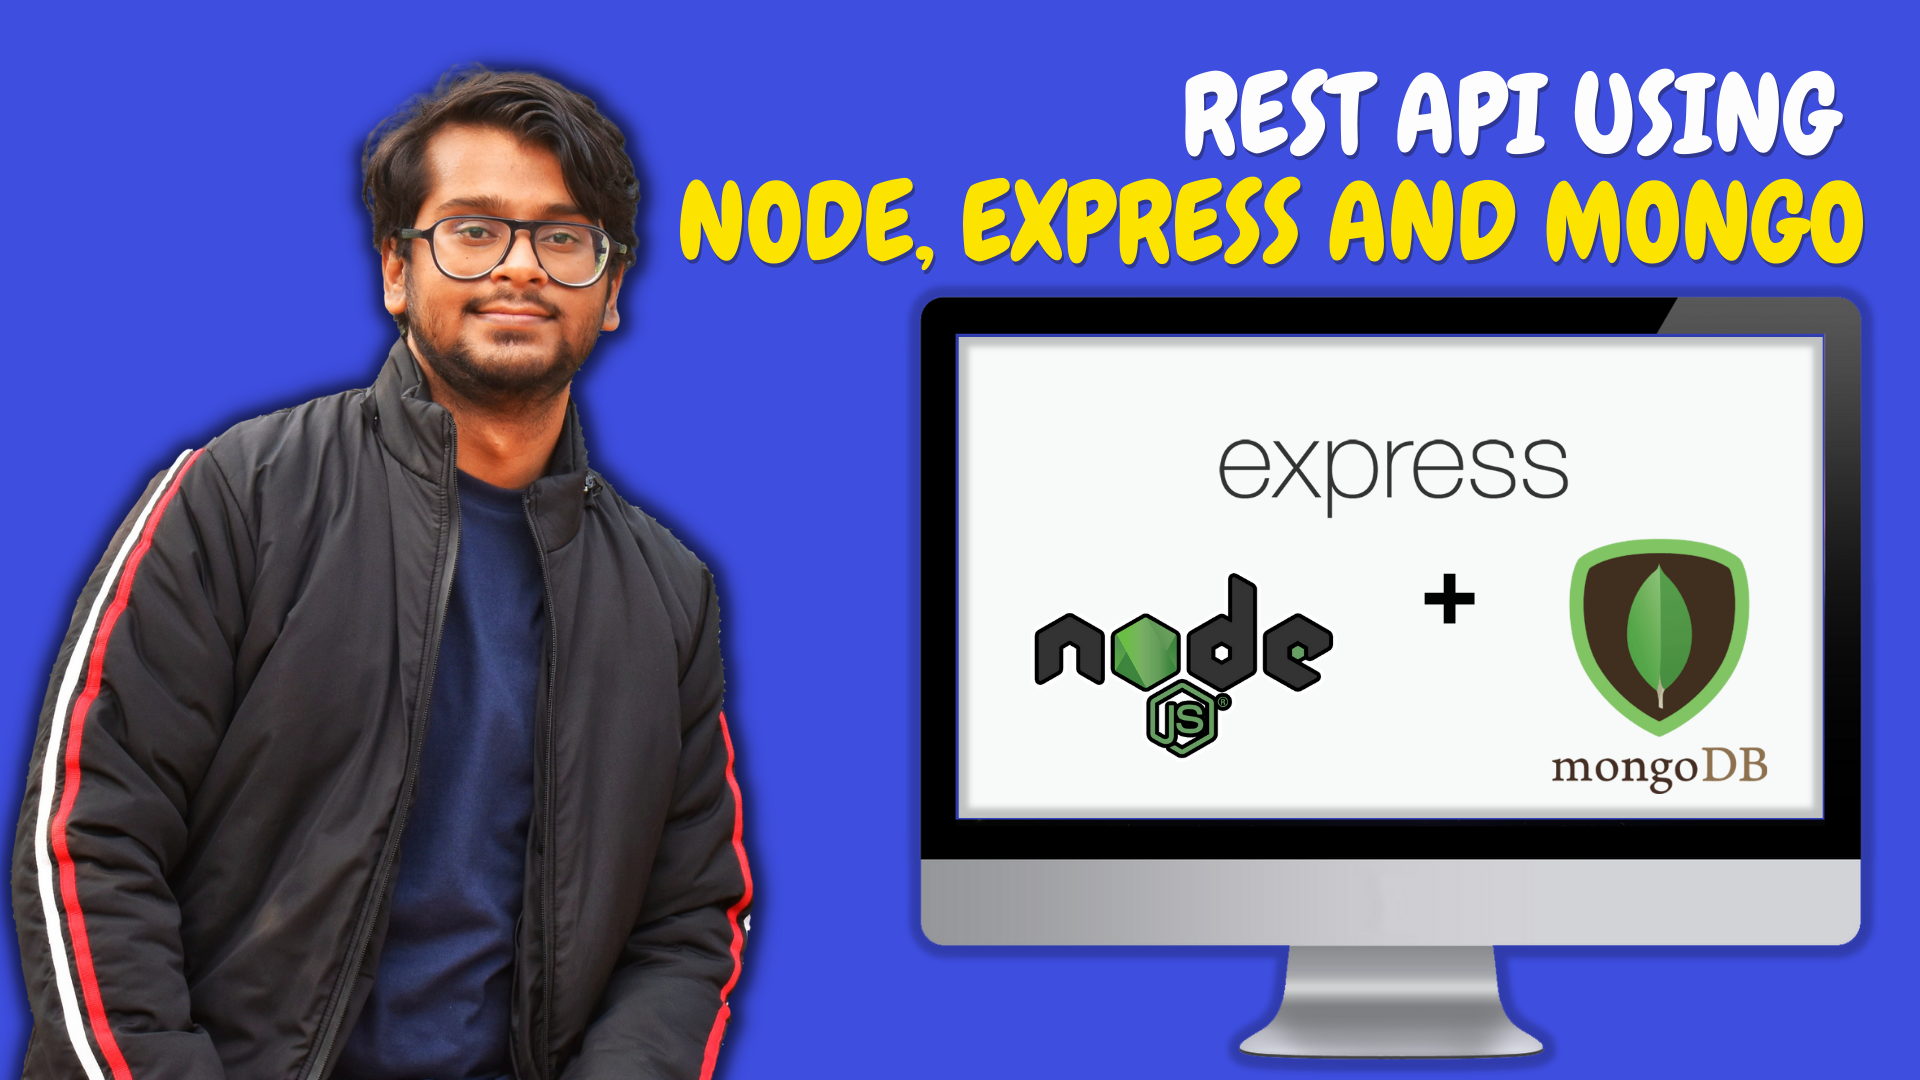 How to Build a RESTful API Using Node, Express, and MongoDB